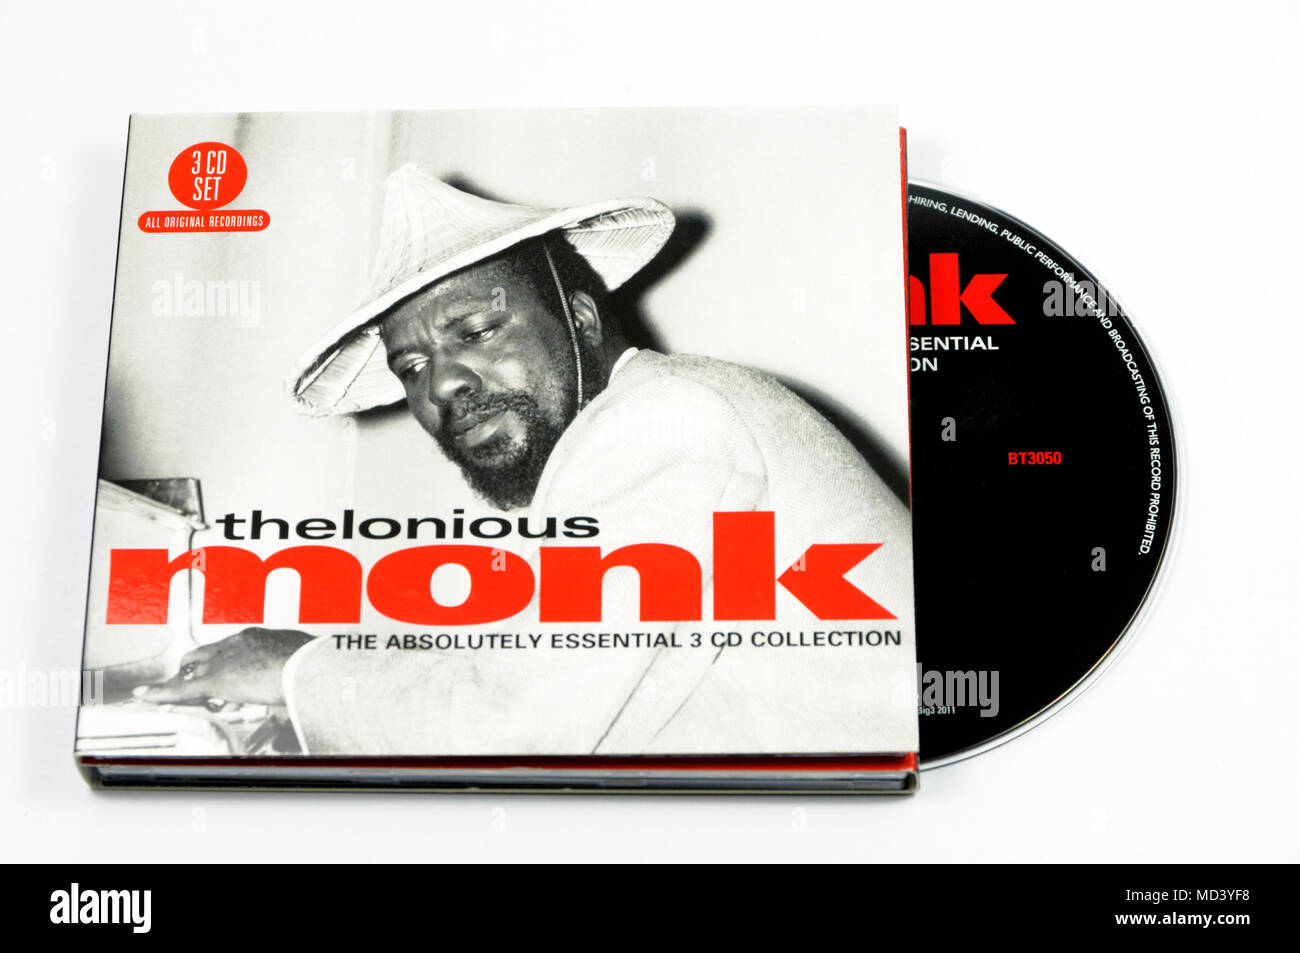 Thelonious Monk The Absolutely Essential 3 cd Collection album Stock Photo